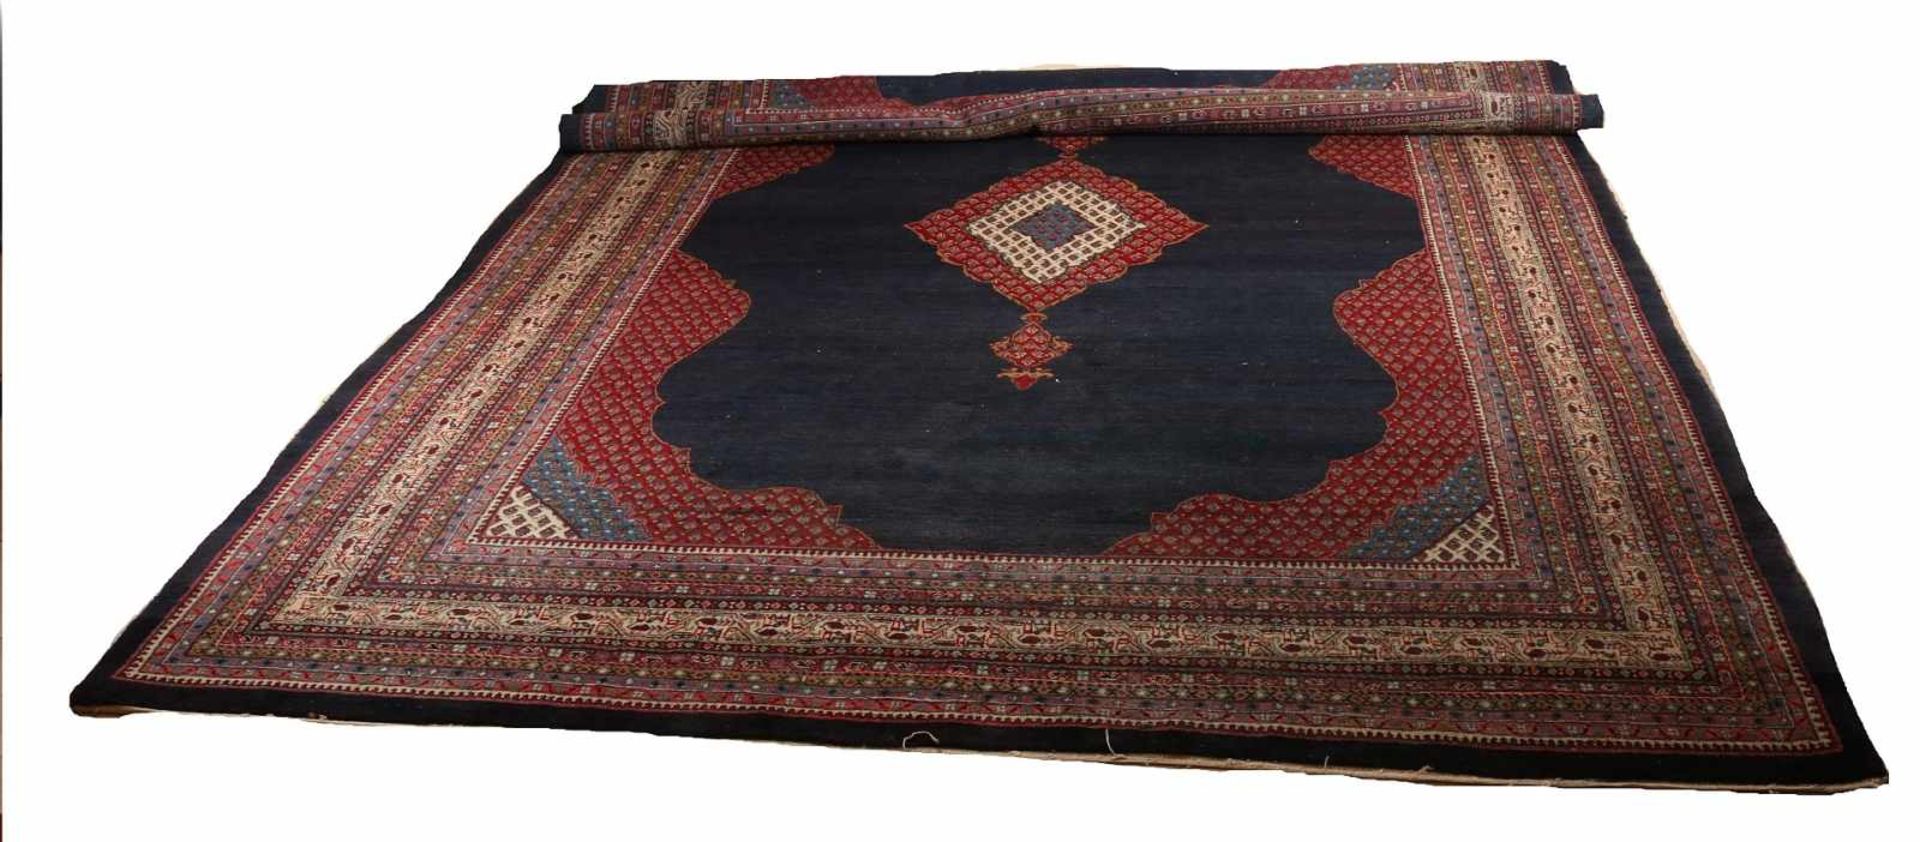 Persian rug in the colors dark blue / dark red with a large medallion in the center. Size: 280 x 385